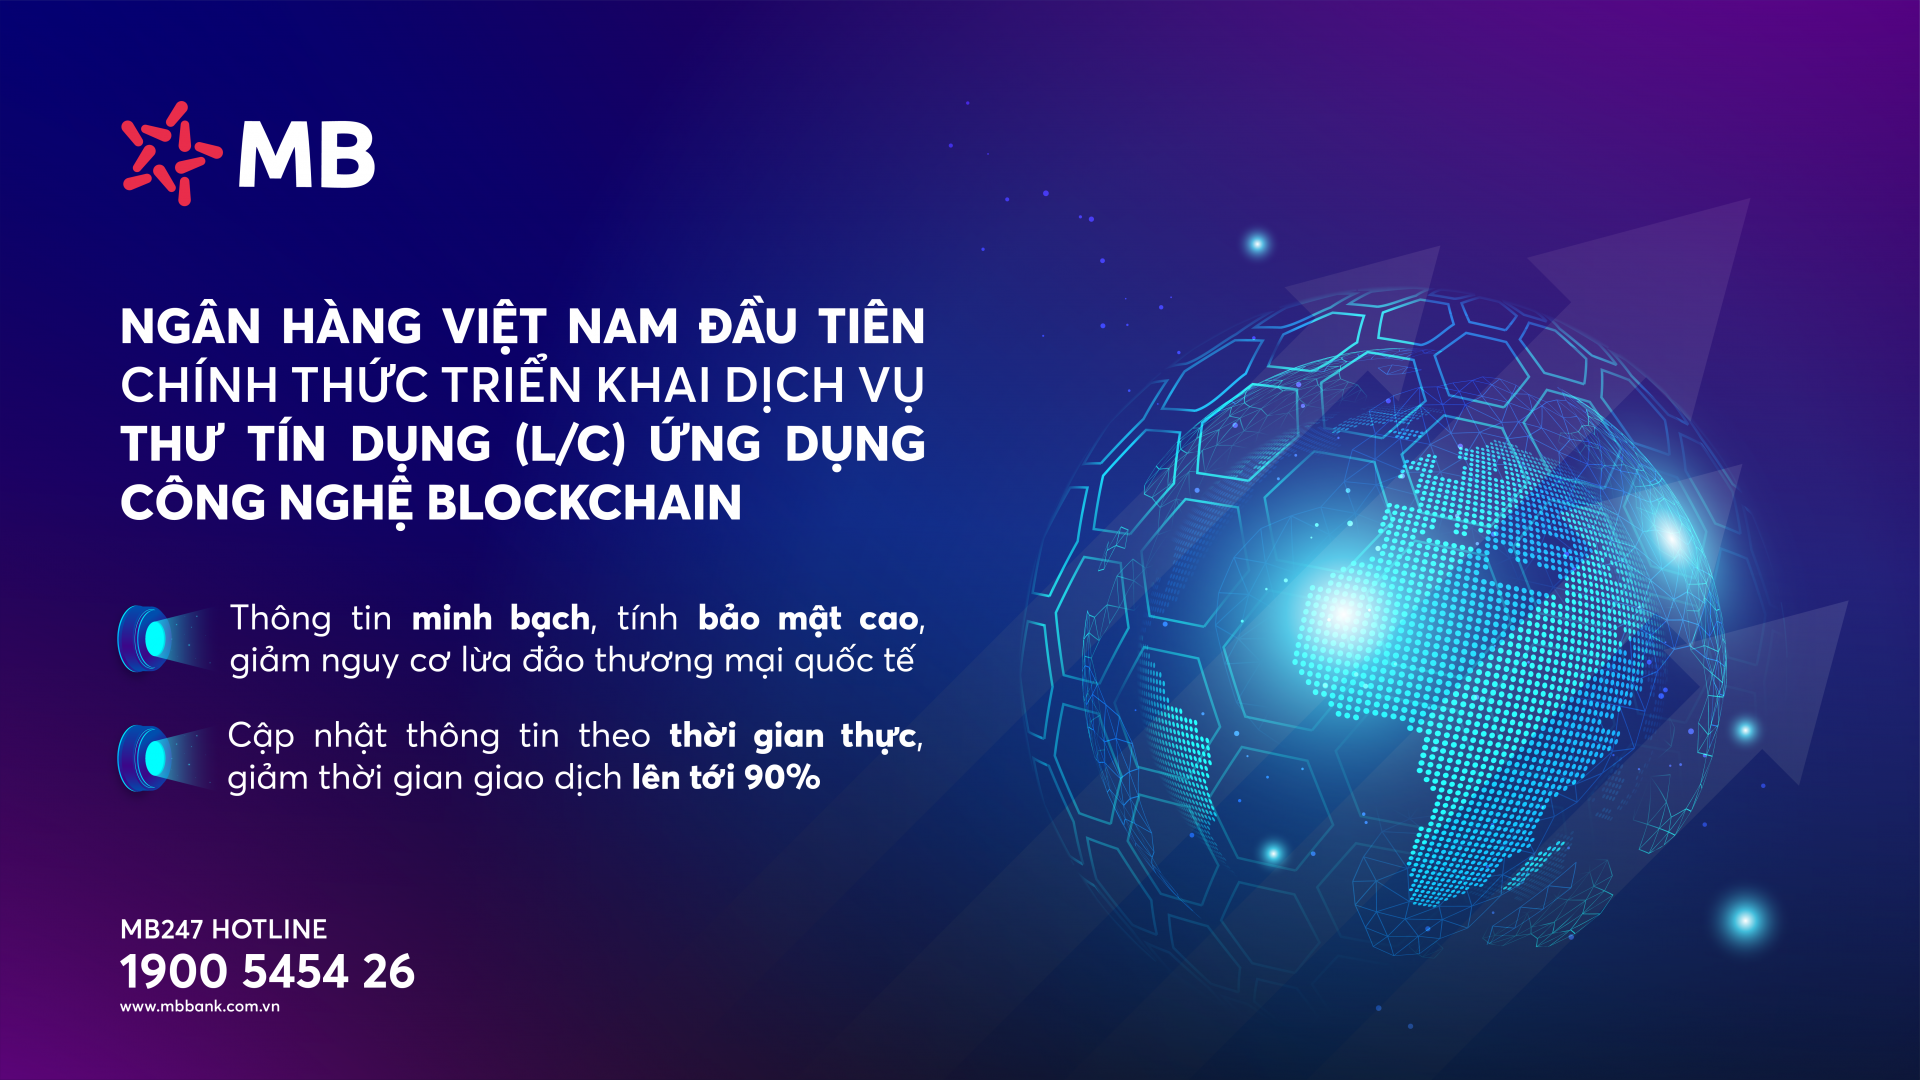 MB becomes the first Vietnamese commercial bank offering blockchain-enabled L/C services